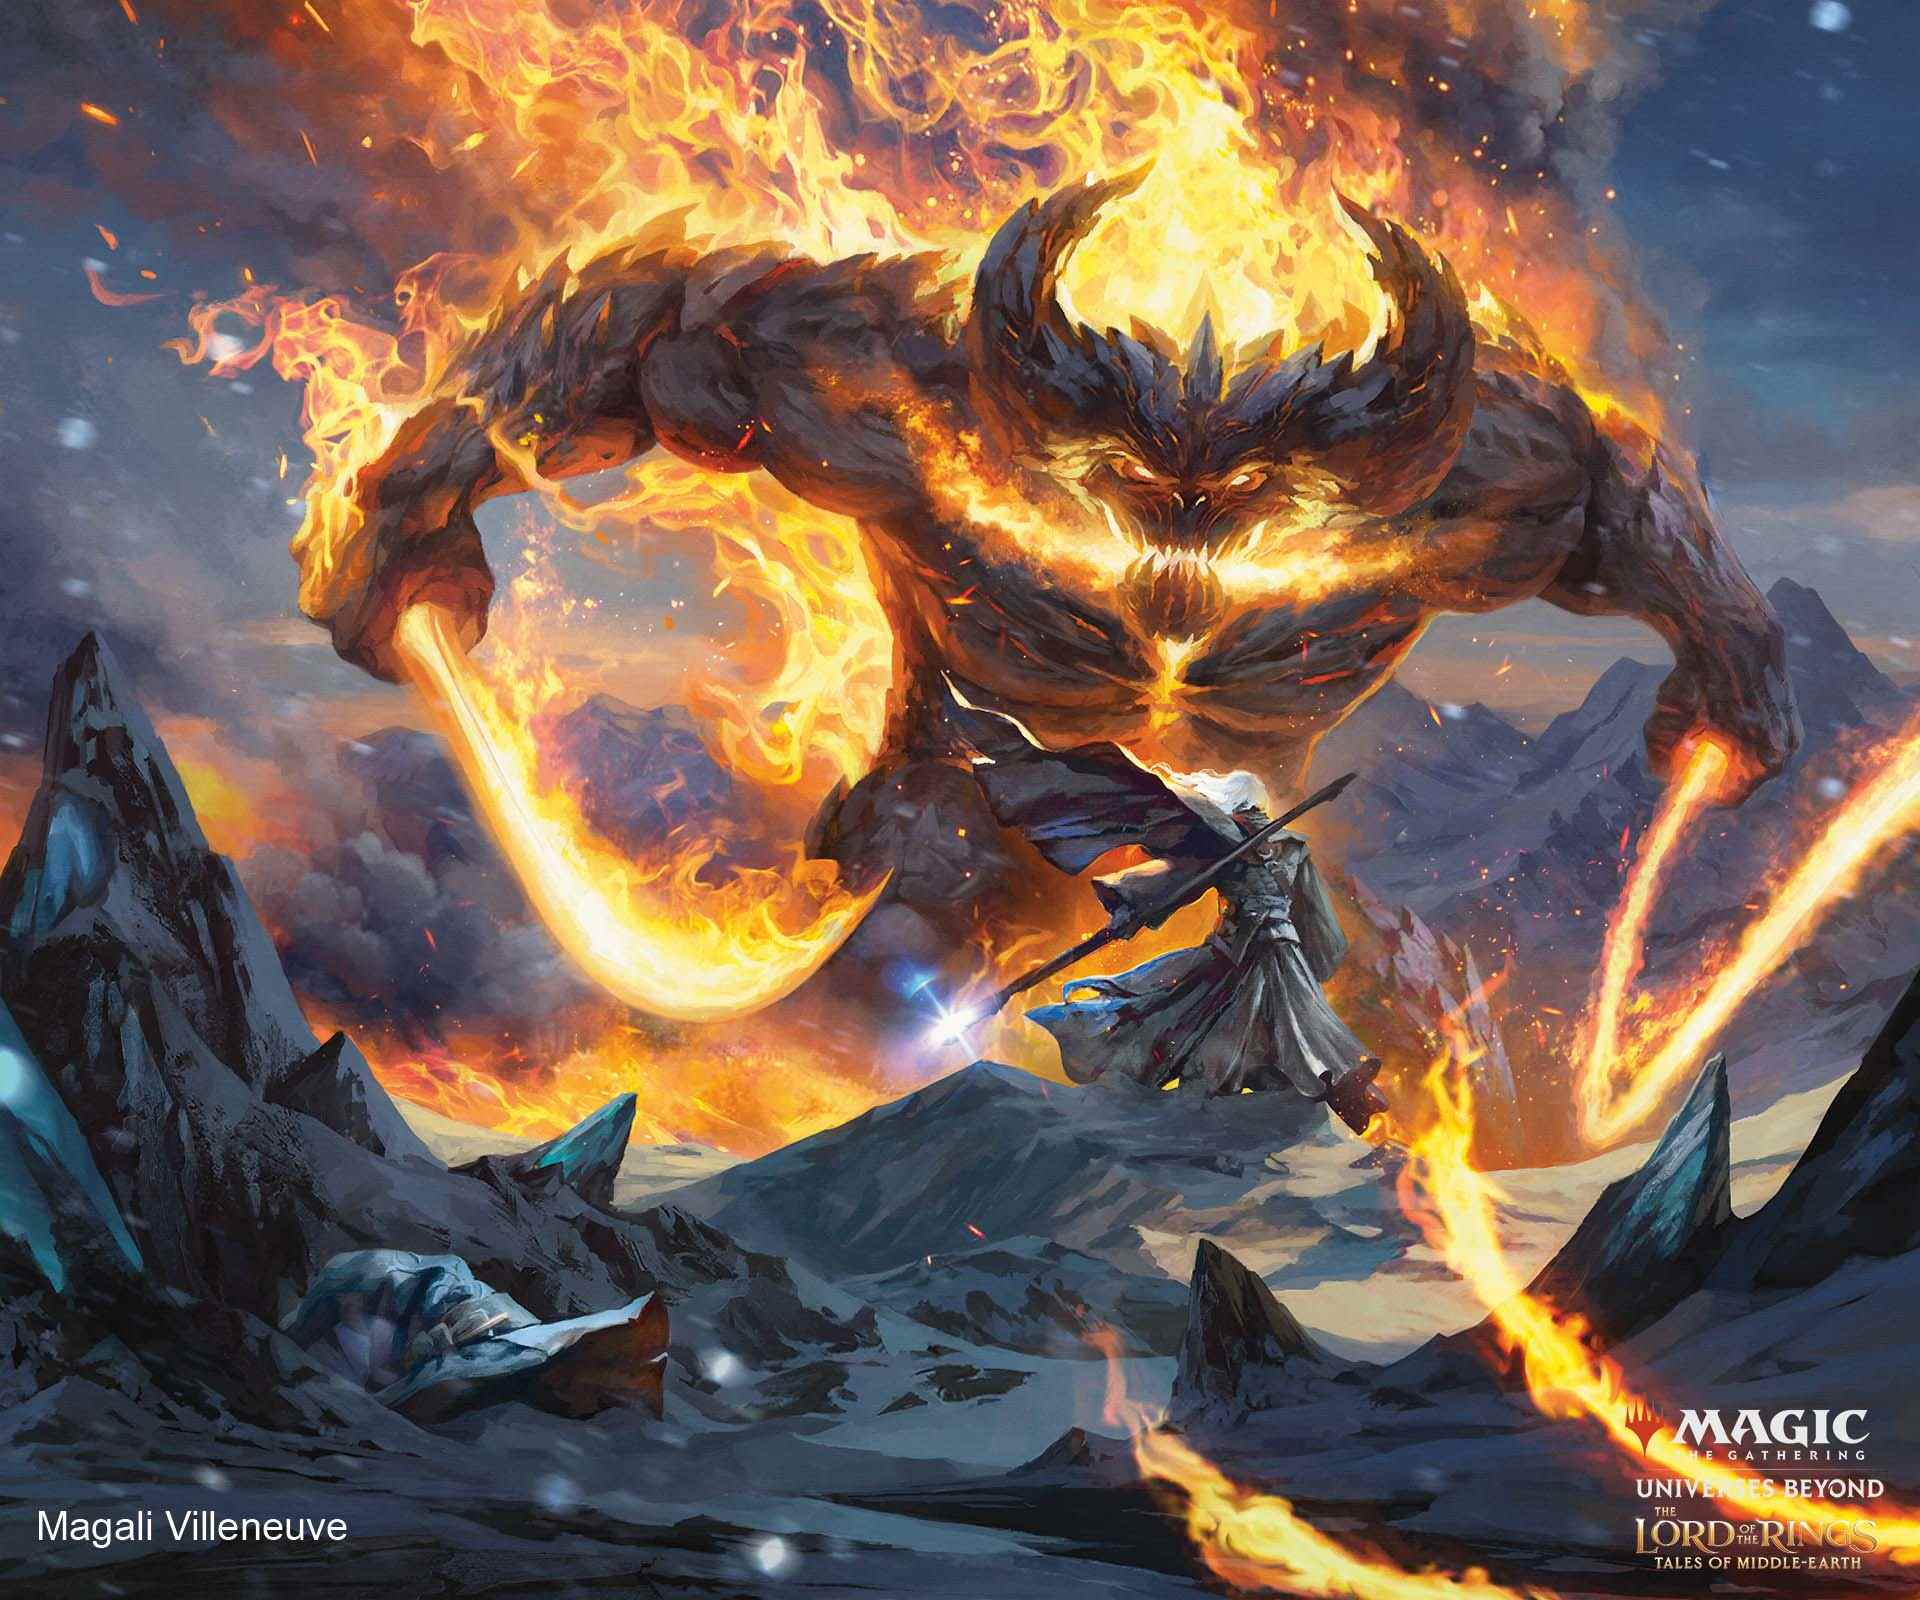 Une image d'art de carte de Magic: The Gathering's Lord of the Rings: Tales of Middle-earth card set.